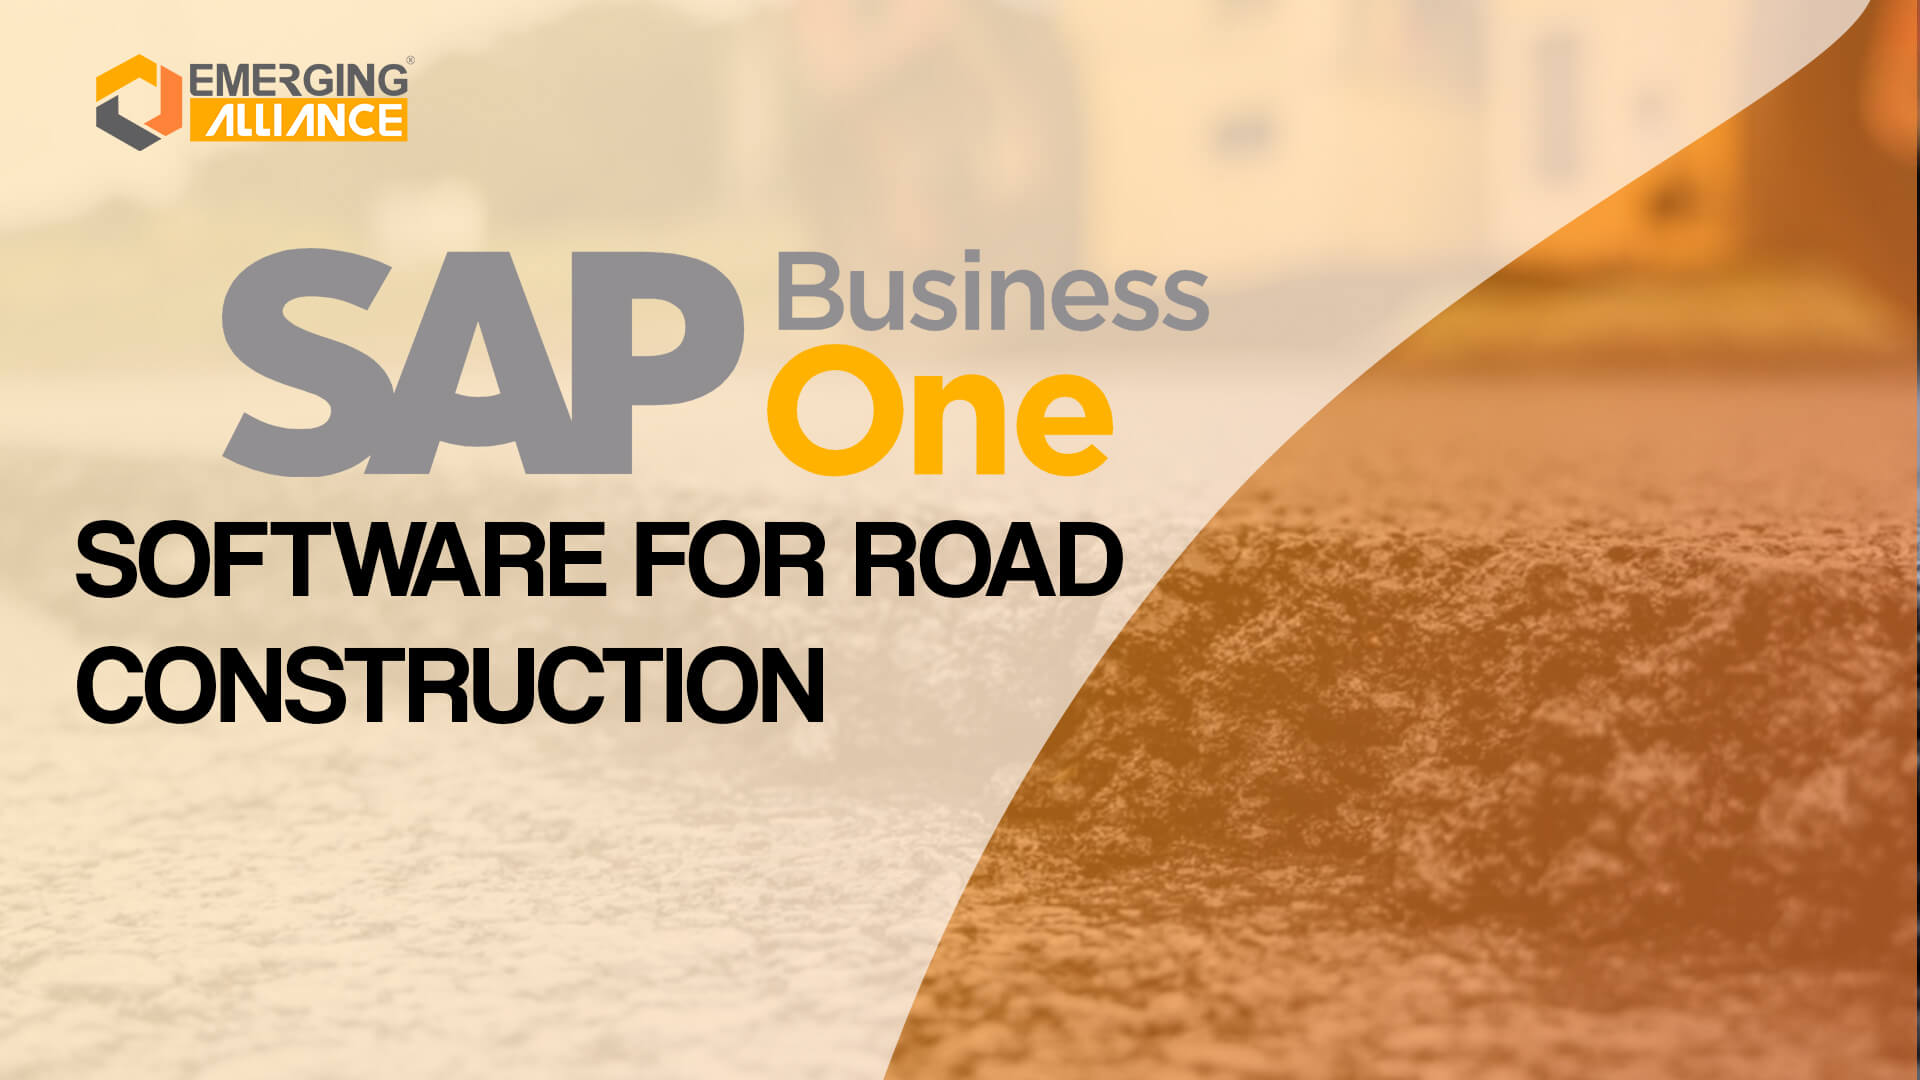 sap business one for software for road construction